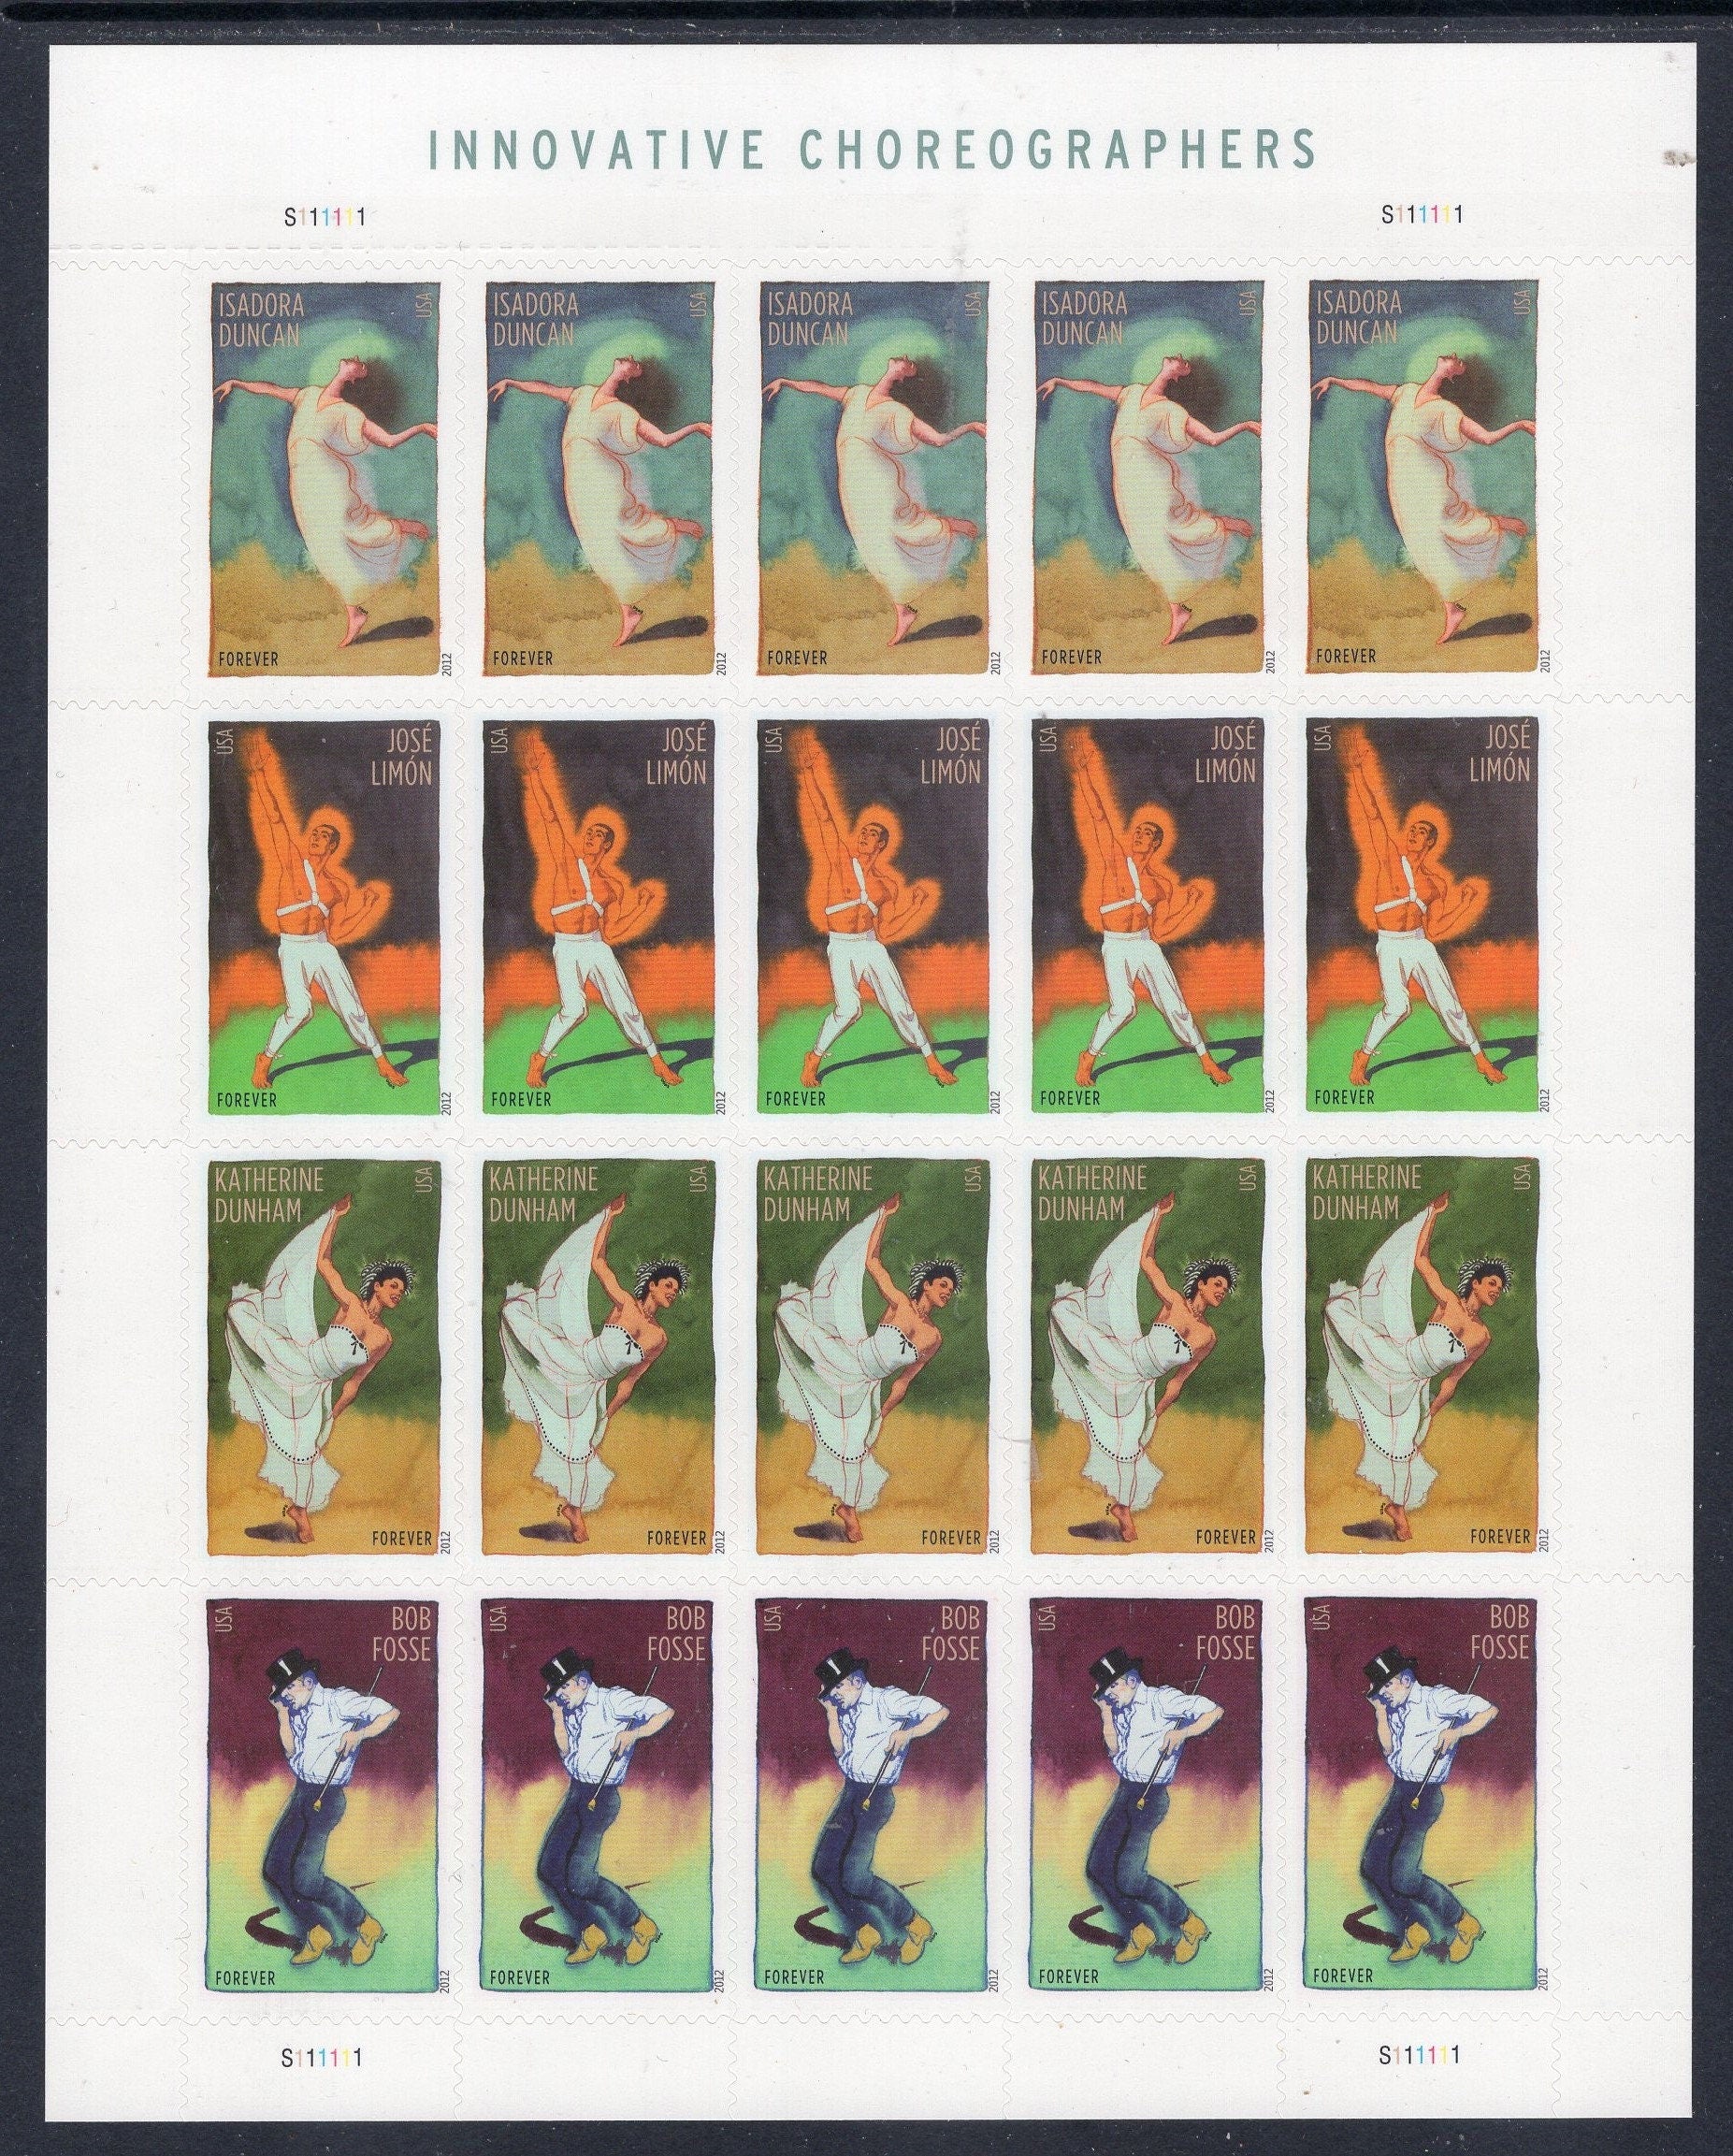 INNOVATIVE CHOREOGRAPHY DUNCAN Dunham Fosse Limon Sheet of 16 Stamps - Bright Fresh - Issued in 2012 - s4698 M -